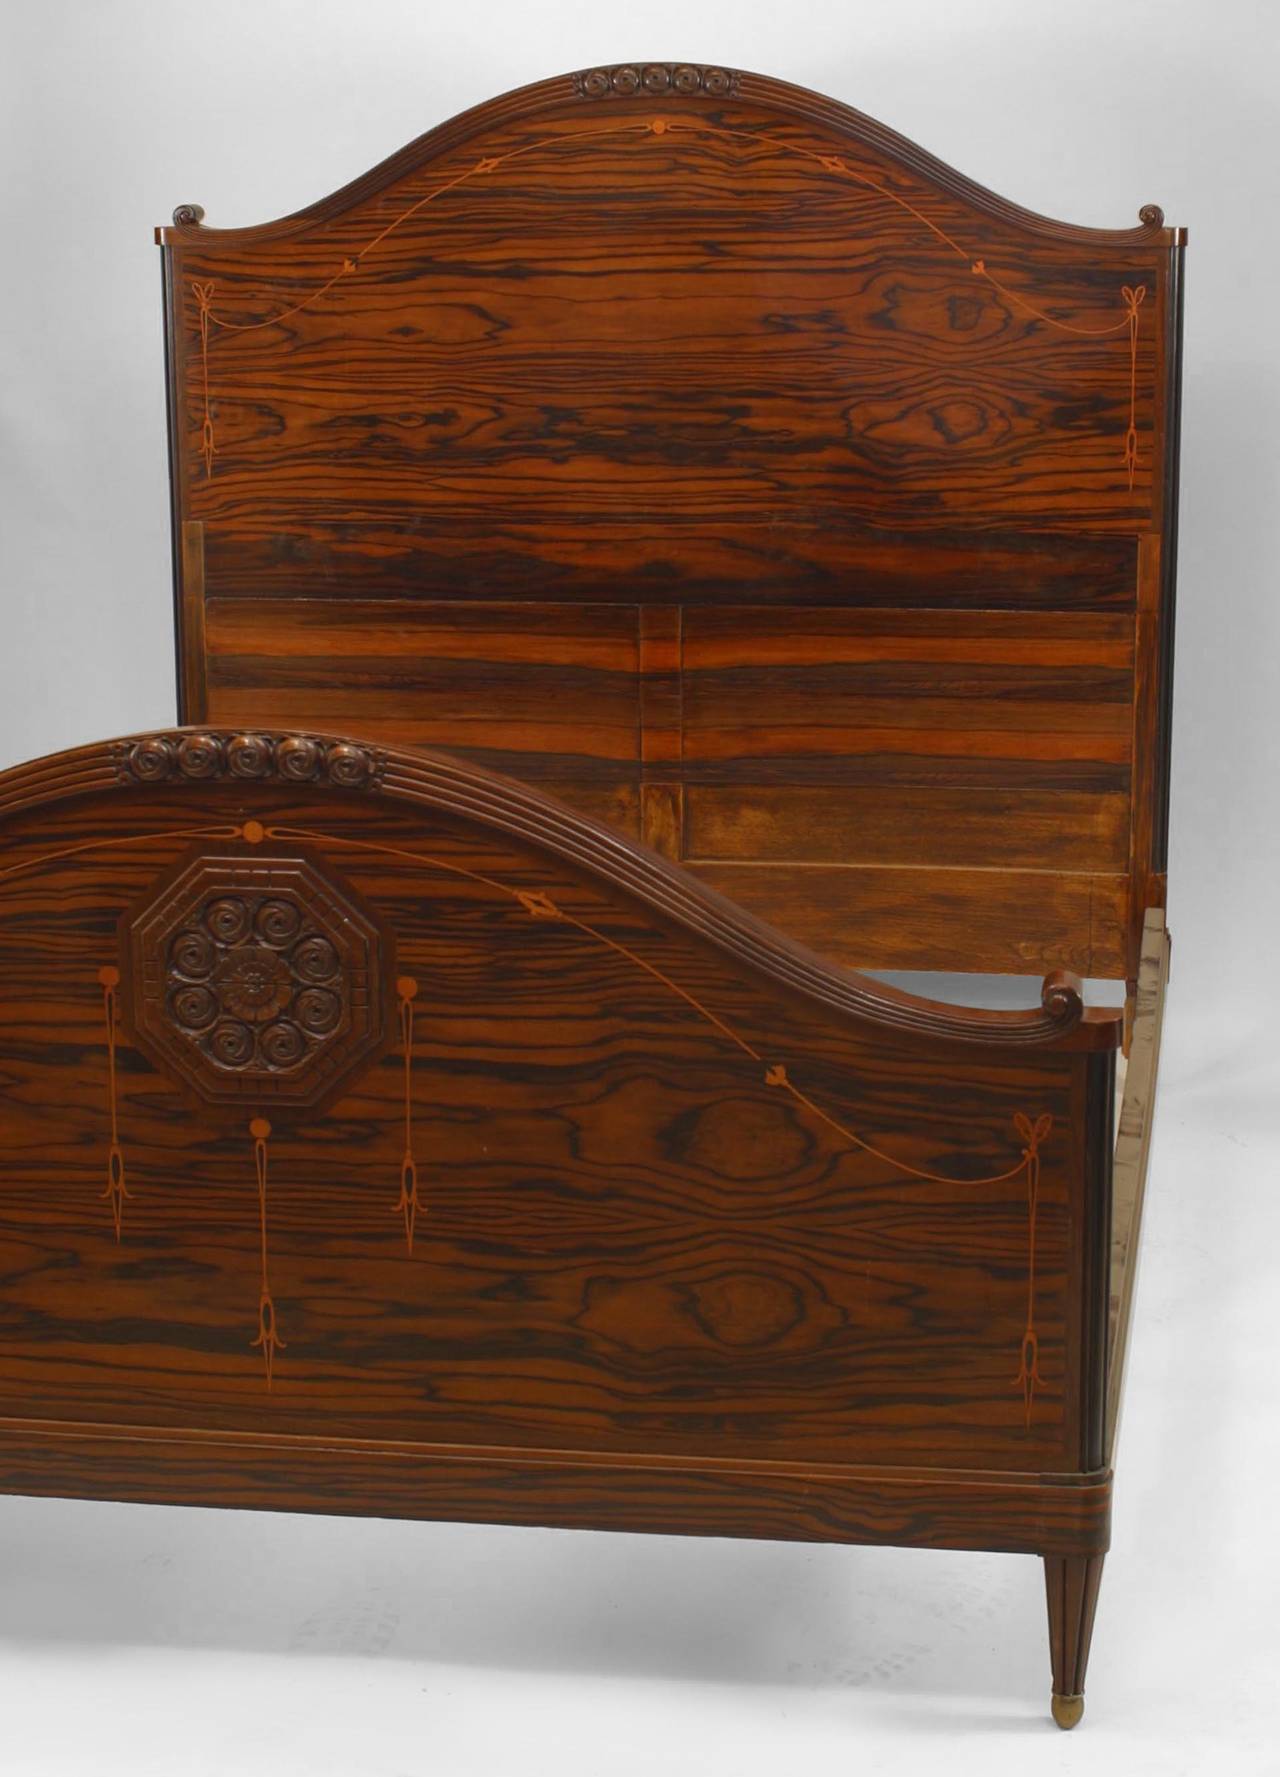 French Art Deco palisander, amaranth and marquetry queen-size bed with arched head and foot boards (includes two rails).